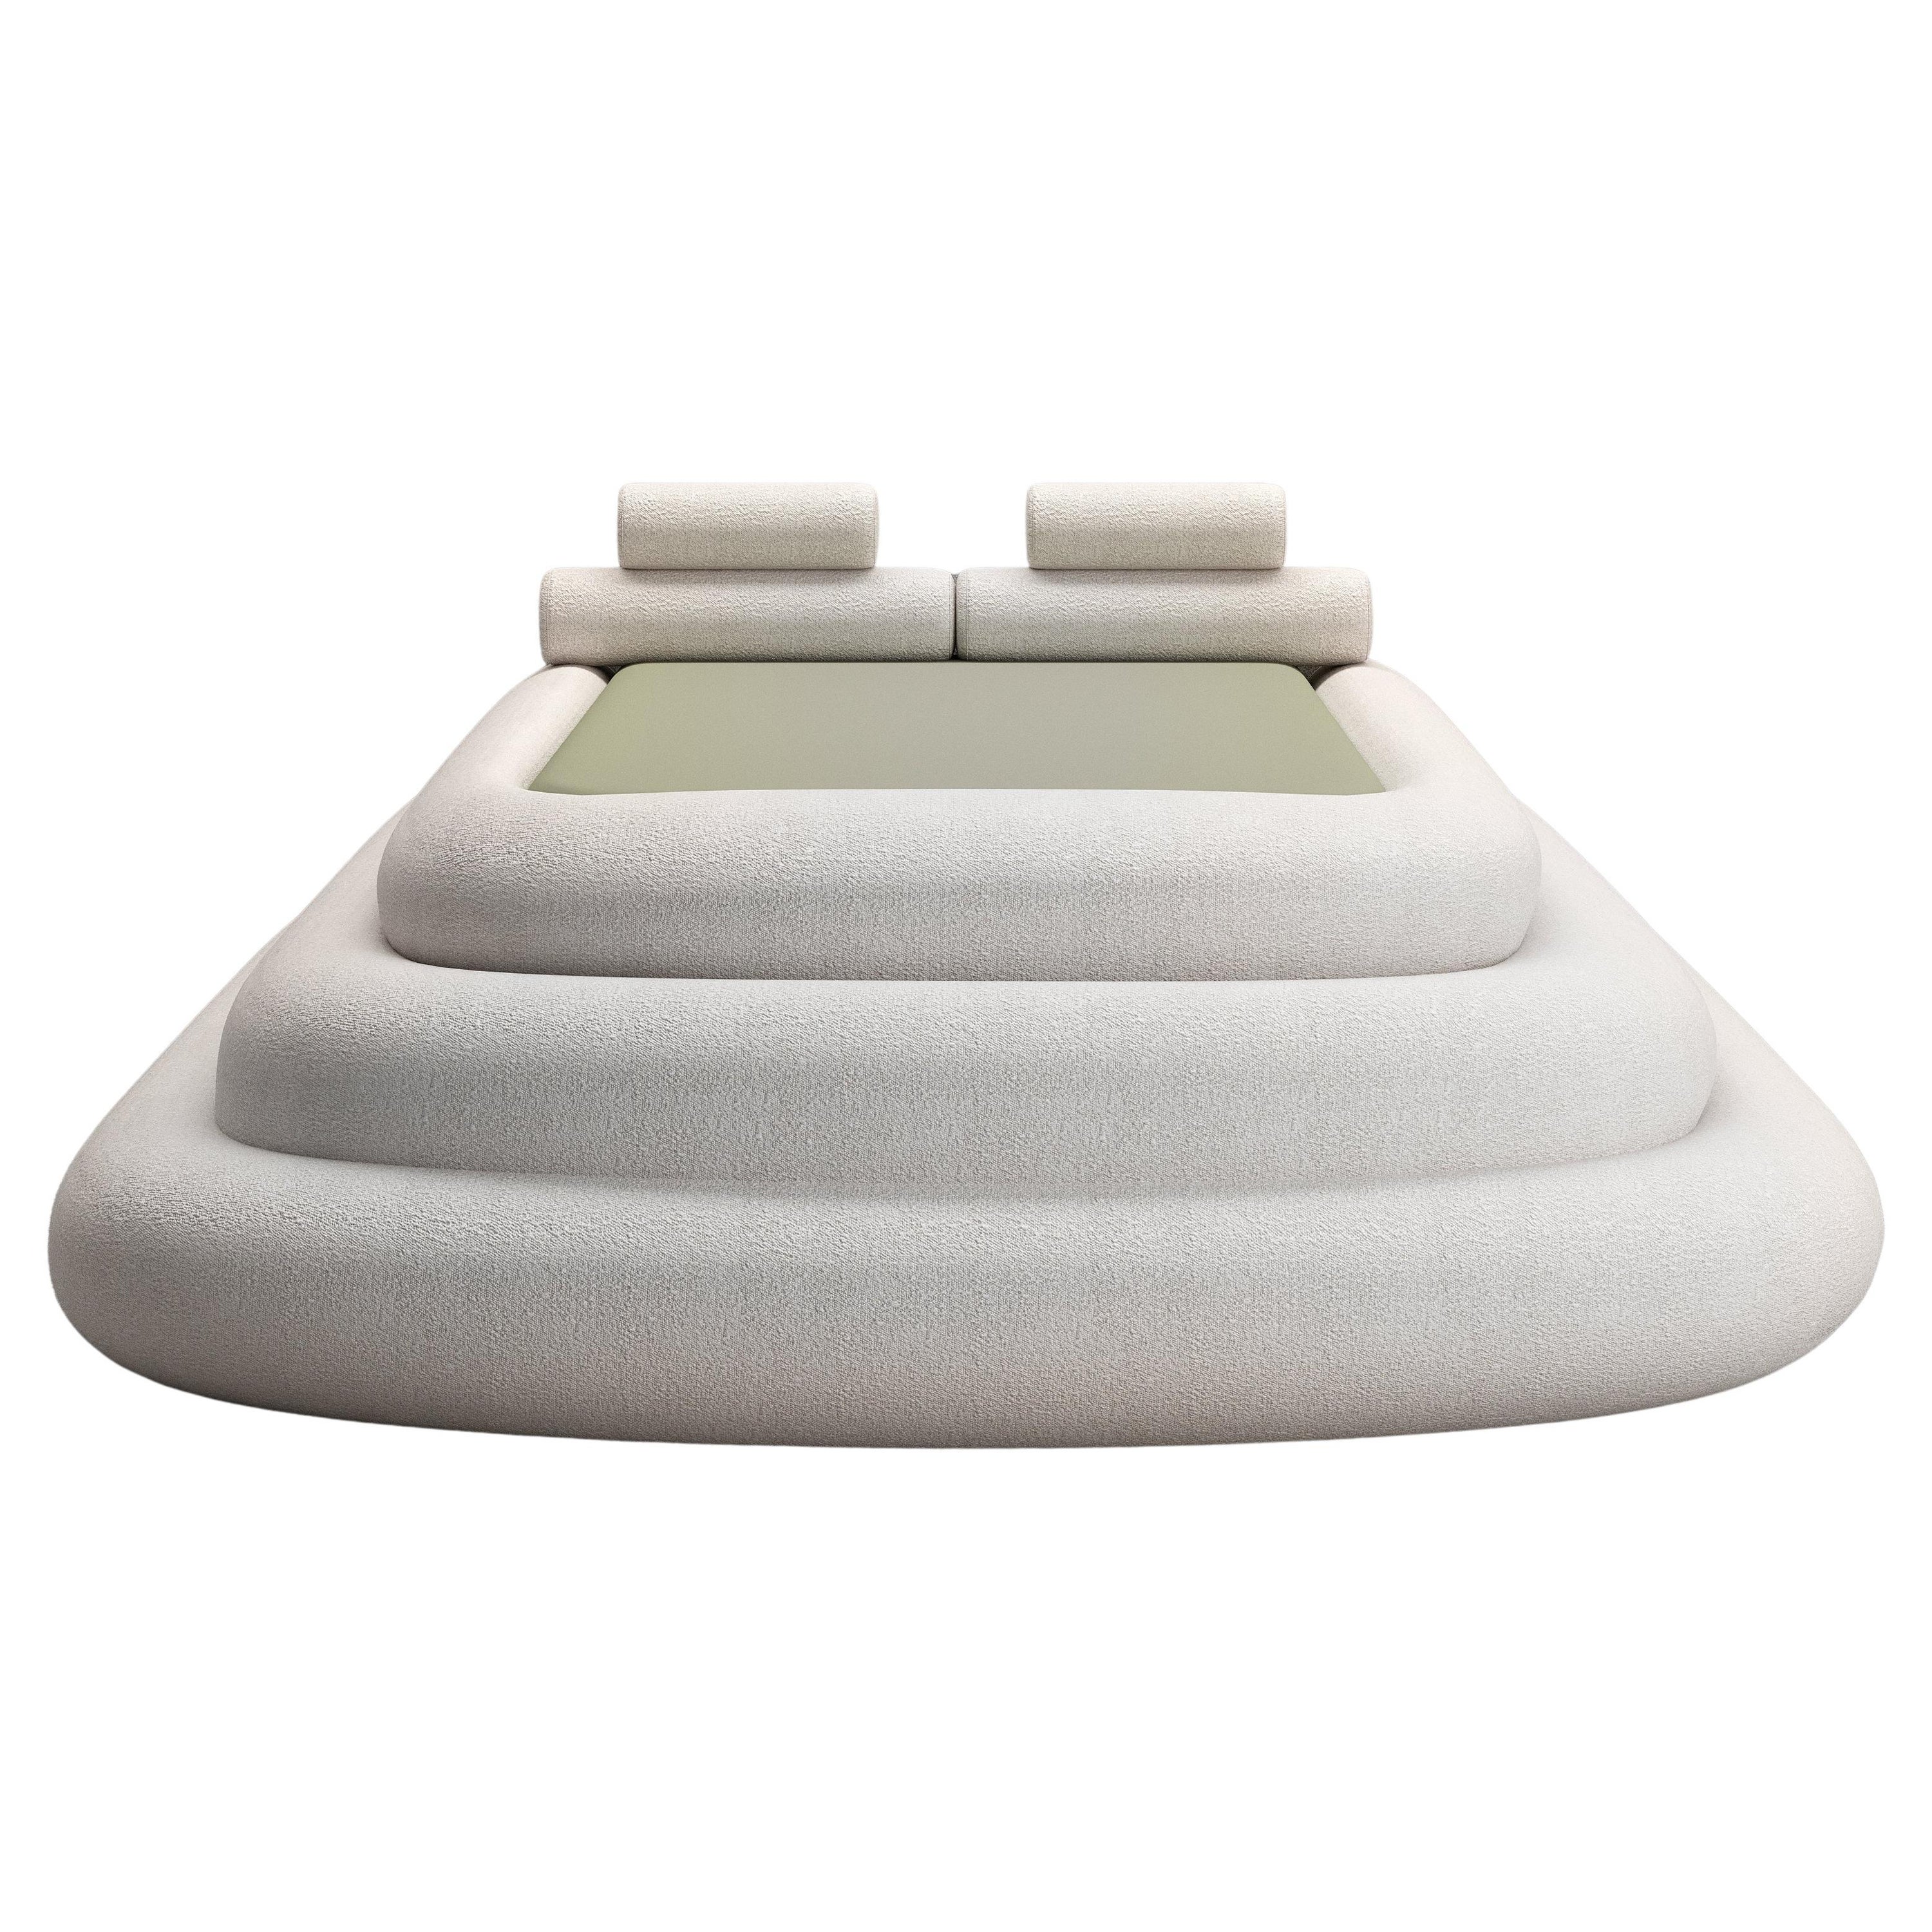 Layered Cake Bed Upholstered in Bouclé Fabric by Koki Design House For Sale